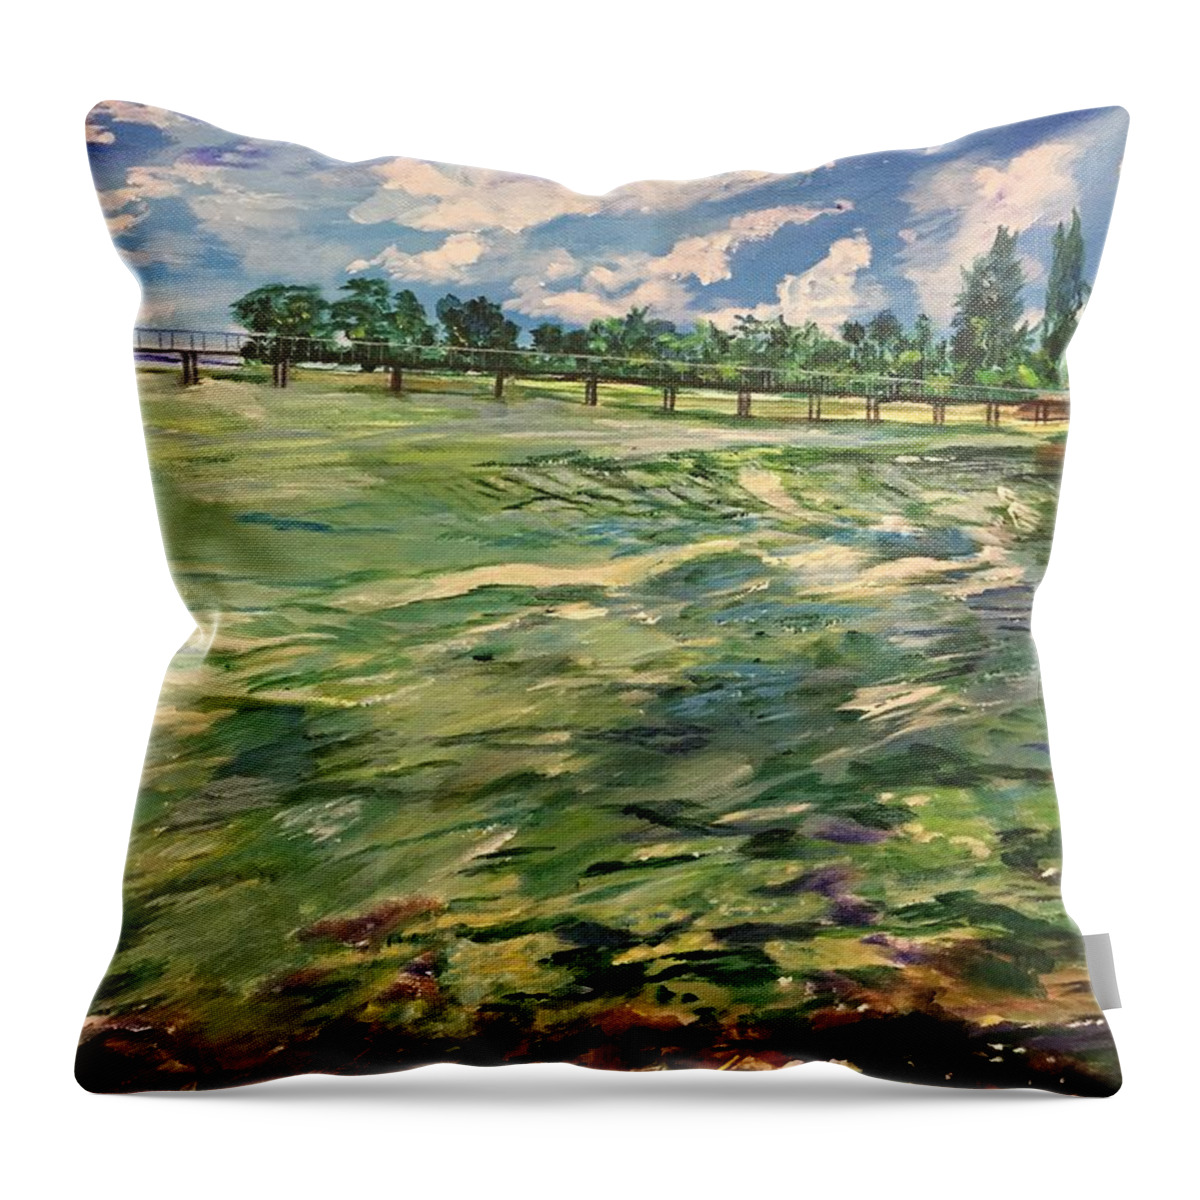 Sea Throw Pillow featuring the painting Follow Your Heart by Belinda Low